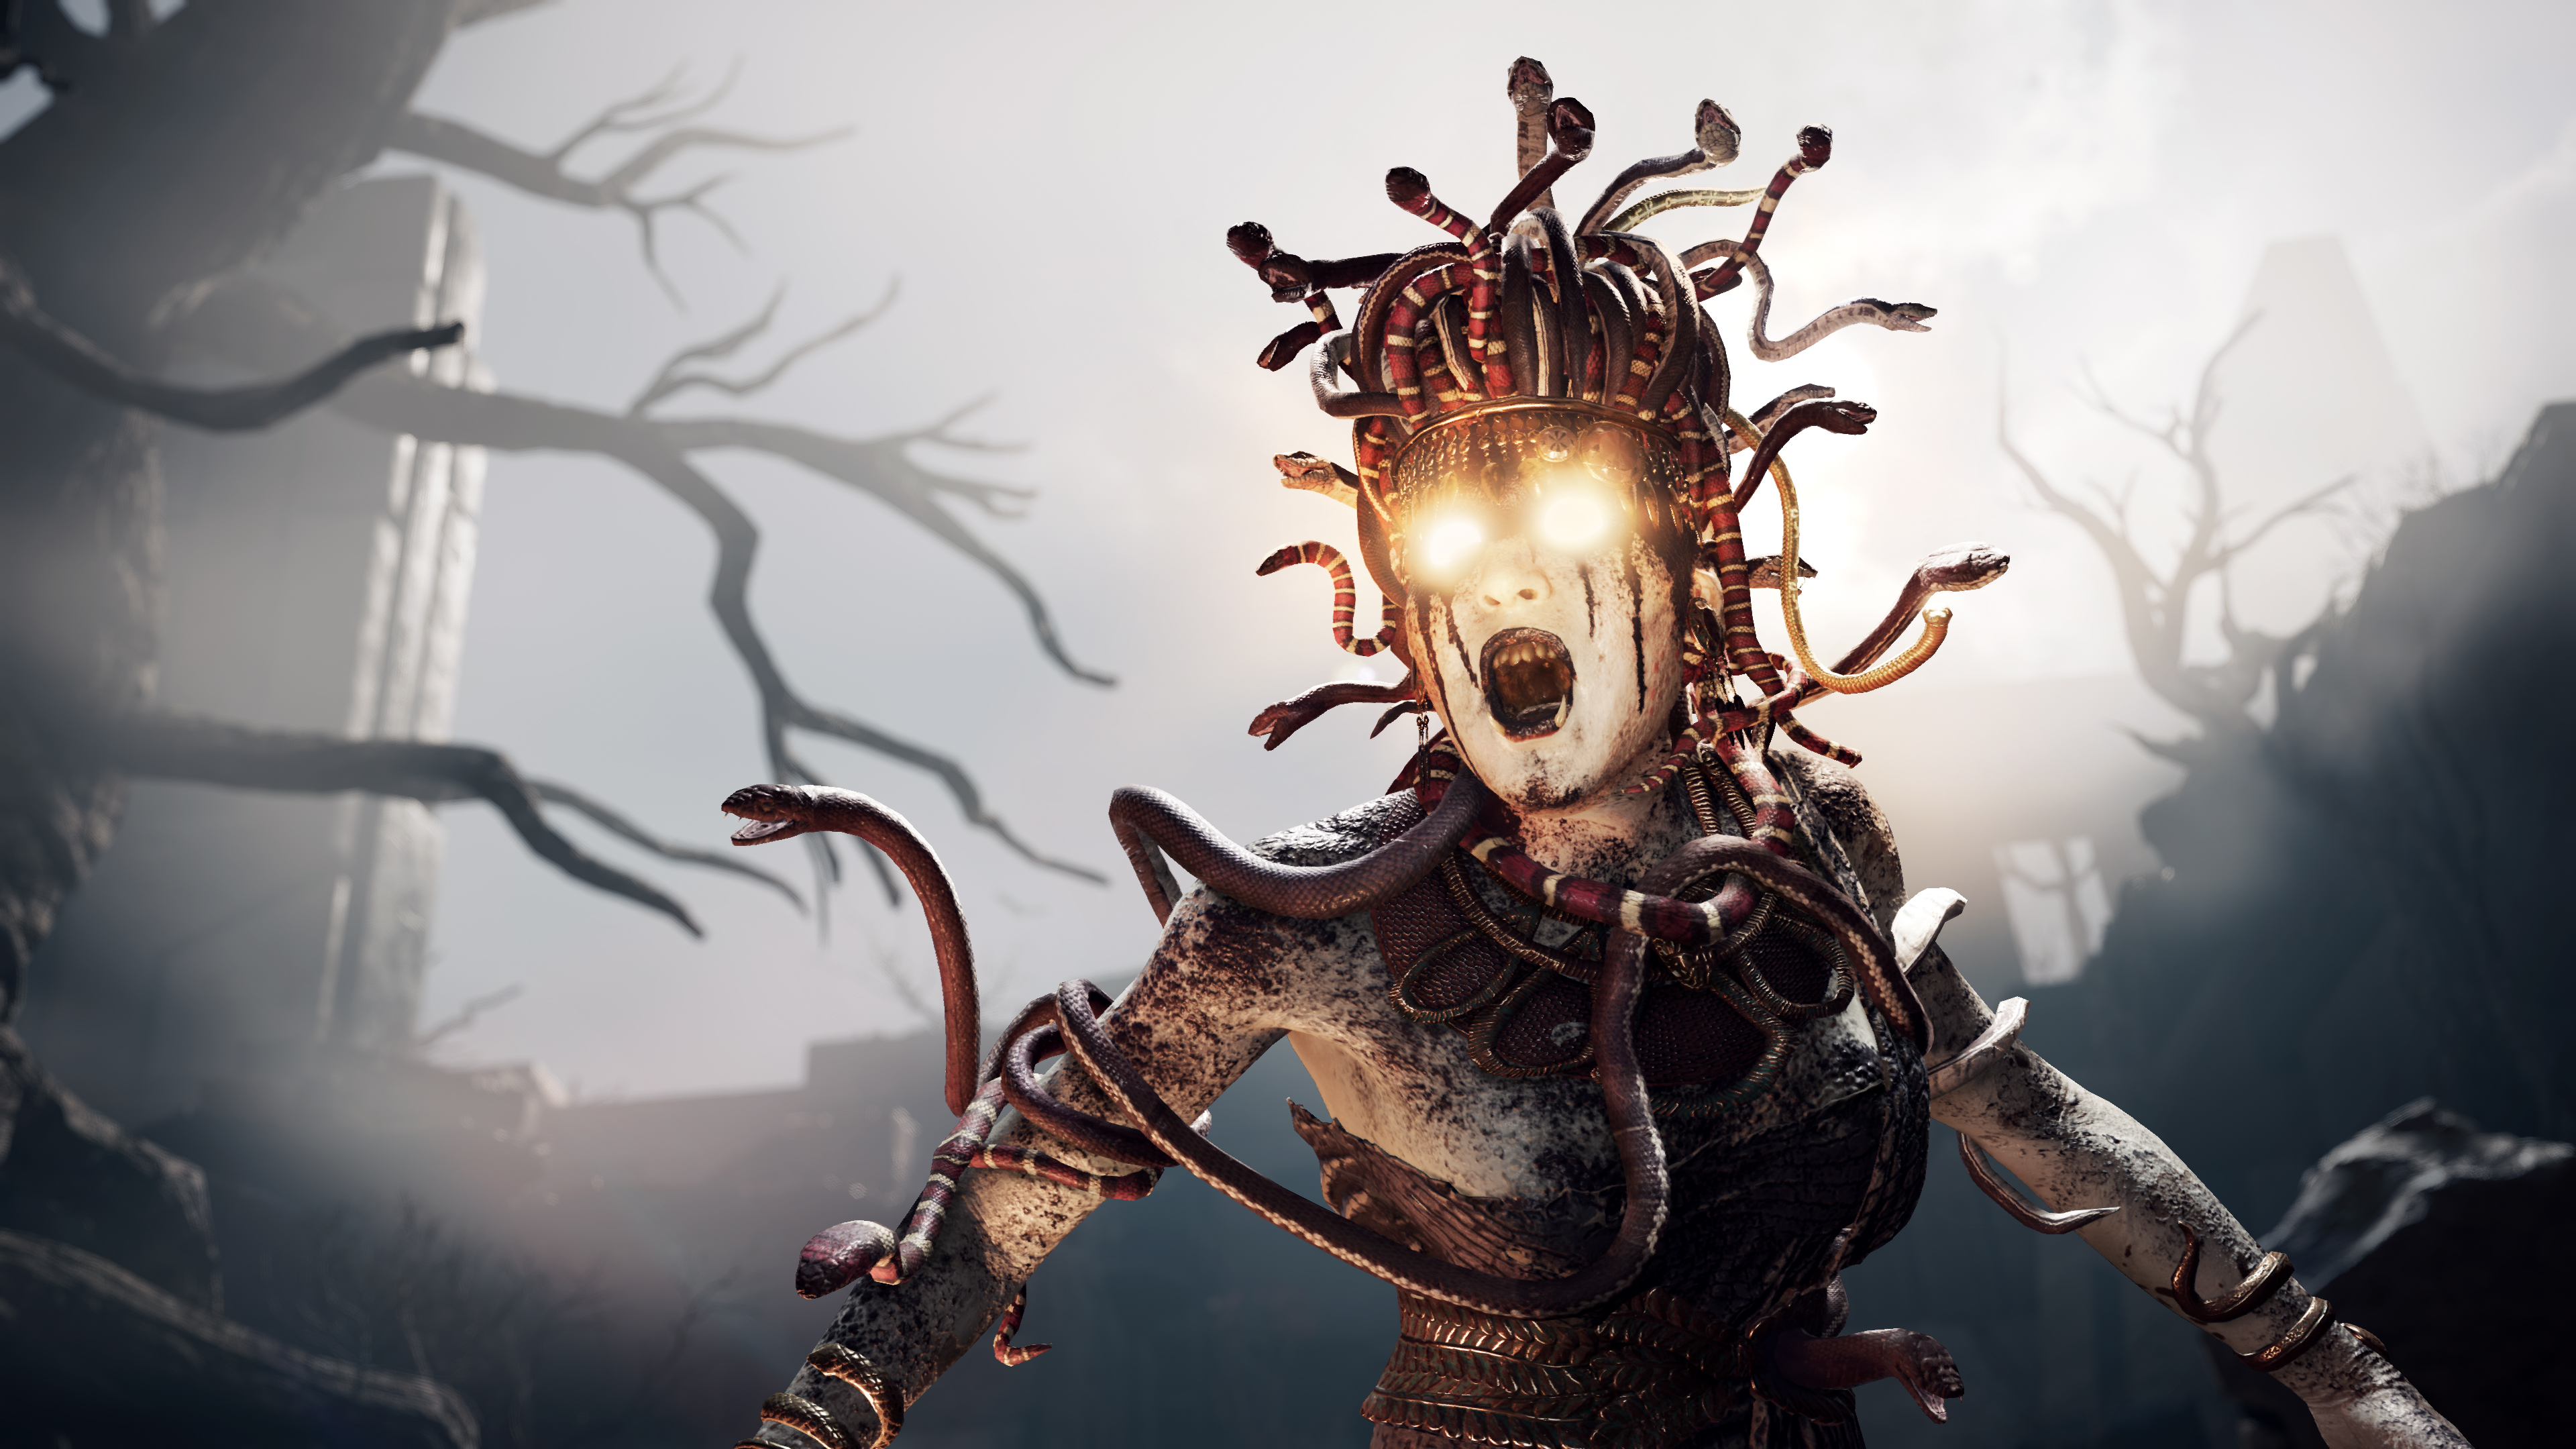 medusa, video game, assassin's creed odyssey, assassin's creed images